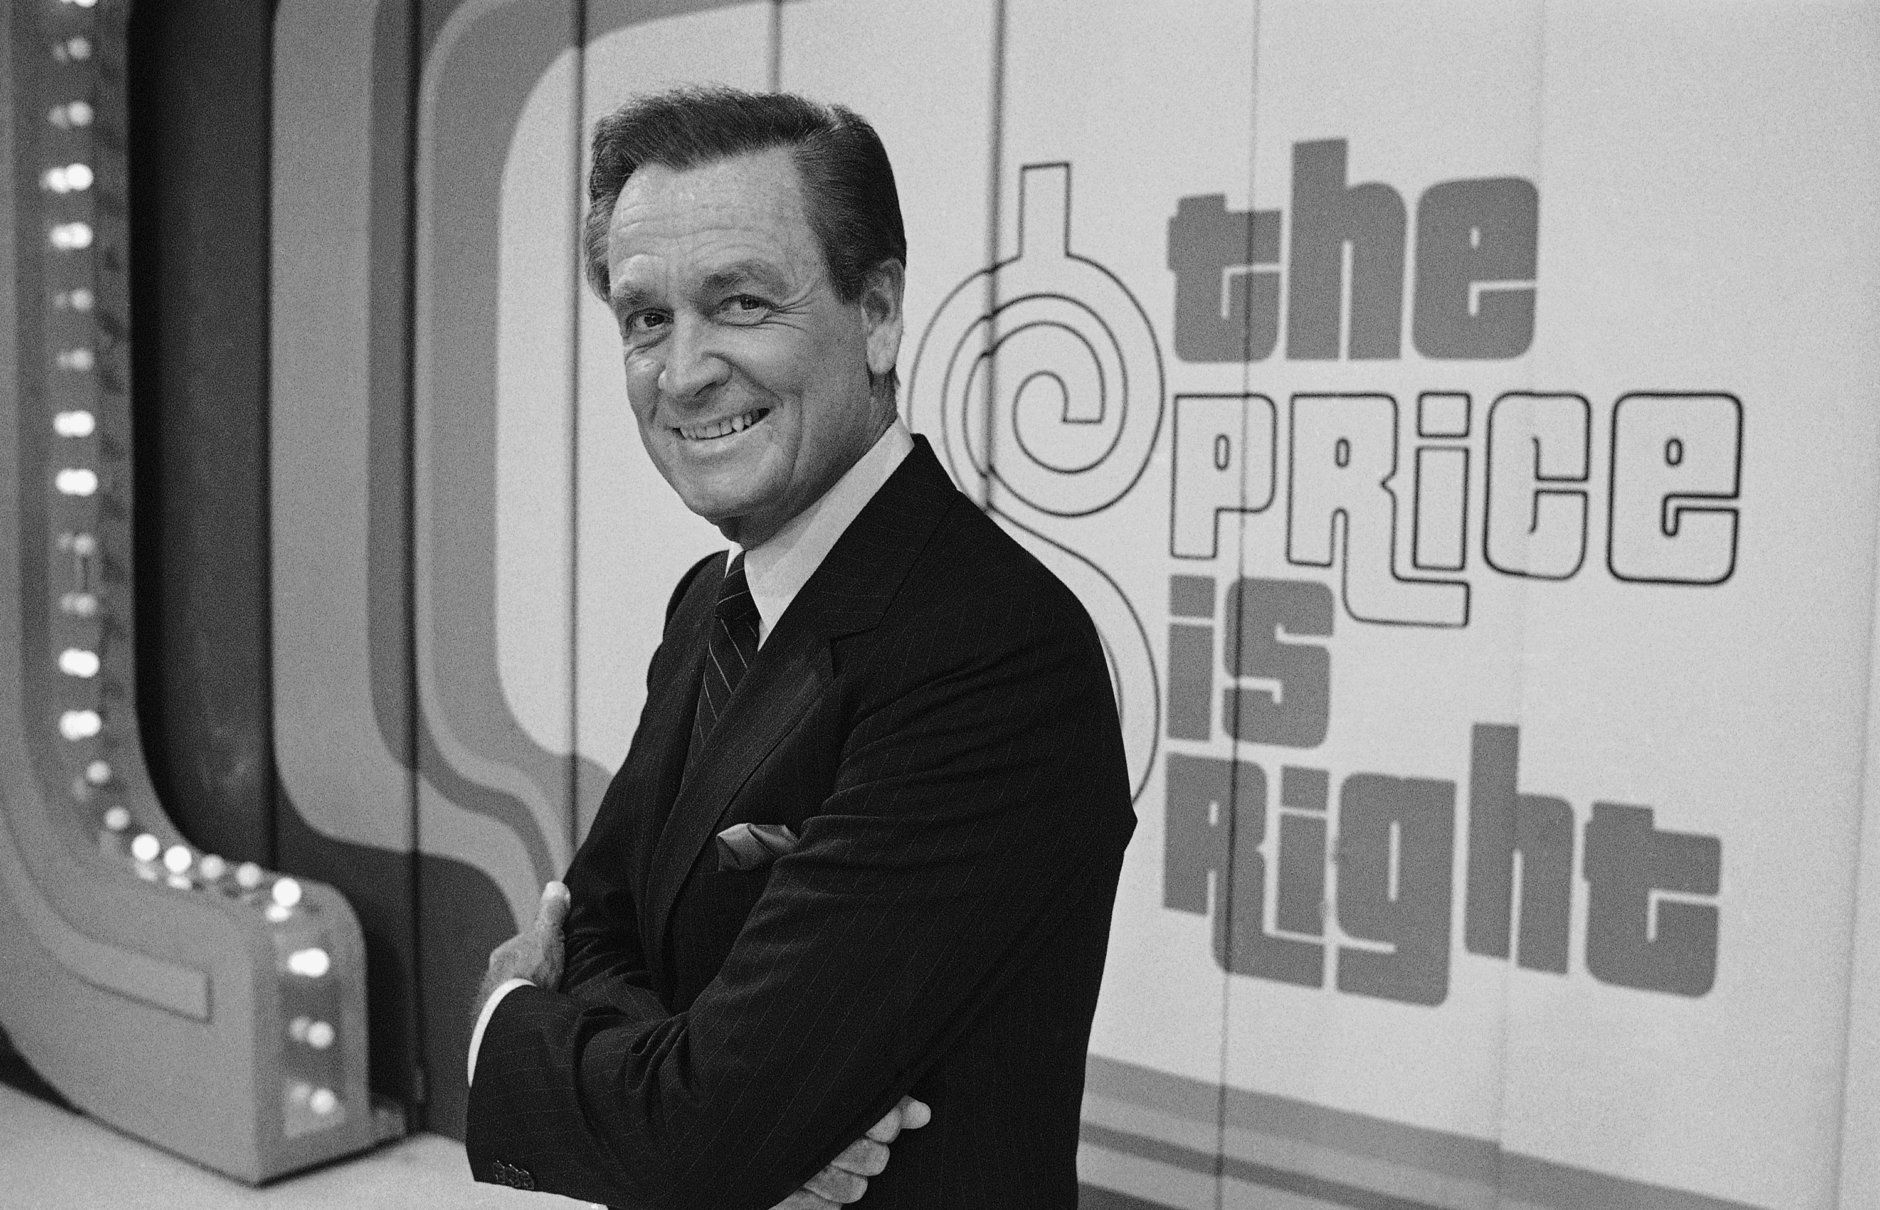 Television host Bob Barker is shown on the set of his show, The Price is Right in Los Angeles on July 25, 1985. (AP Photo/Lennox McLendon)